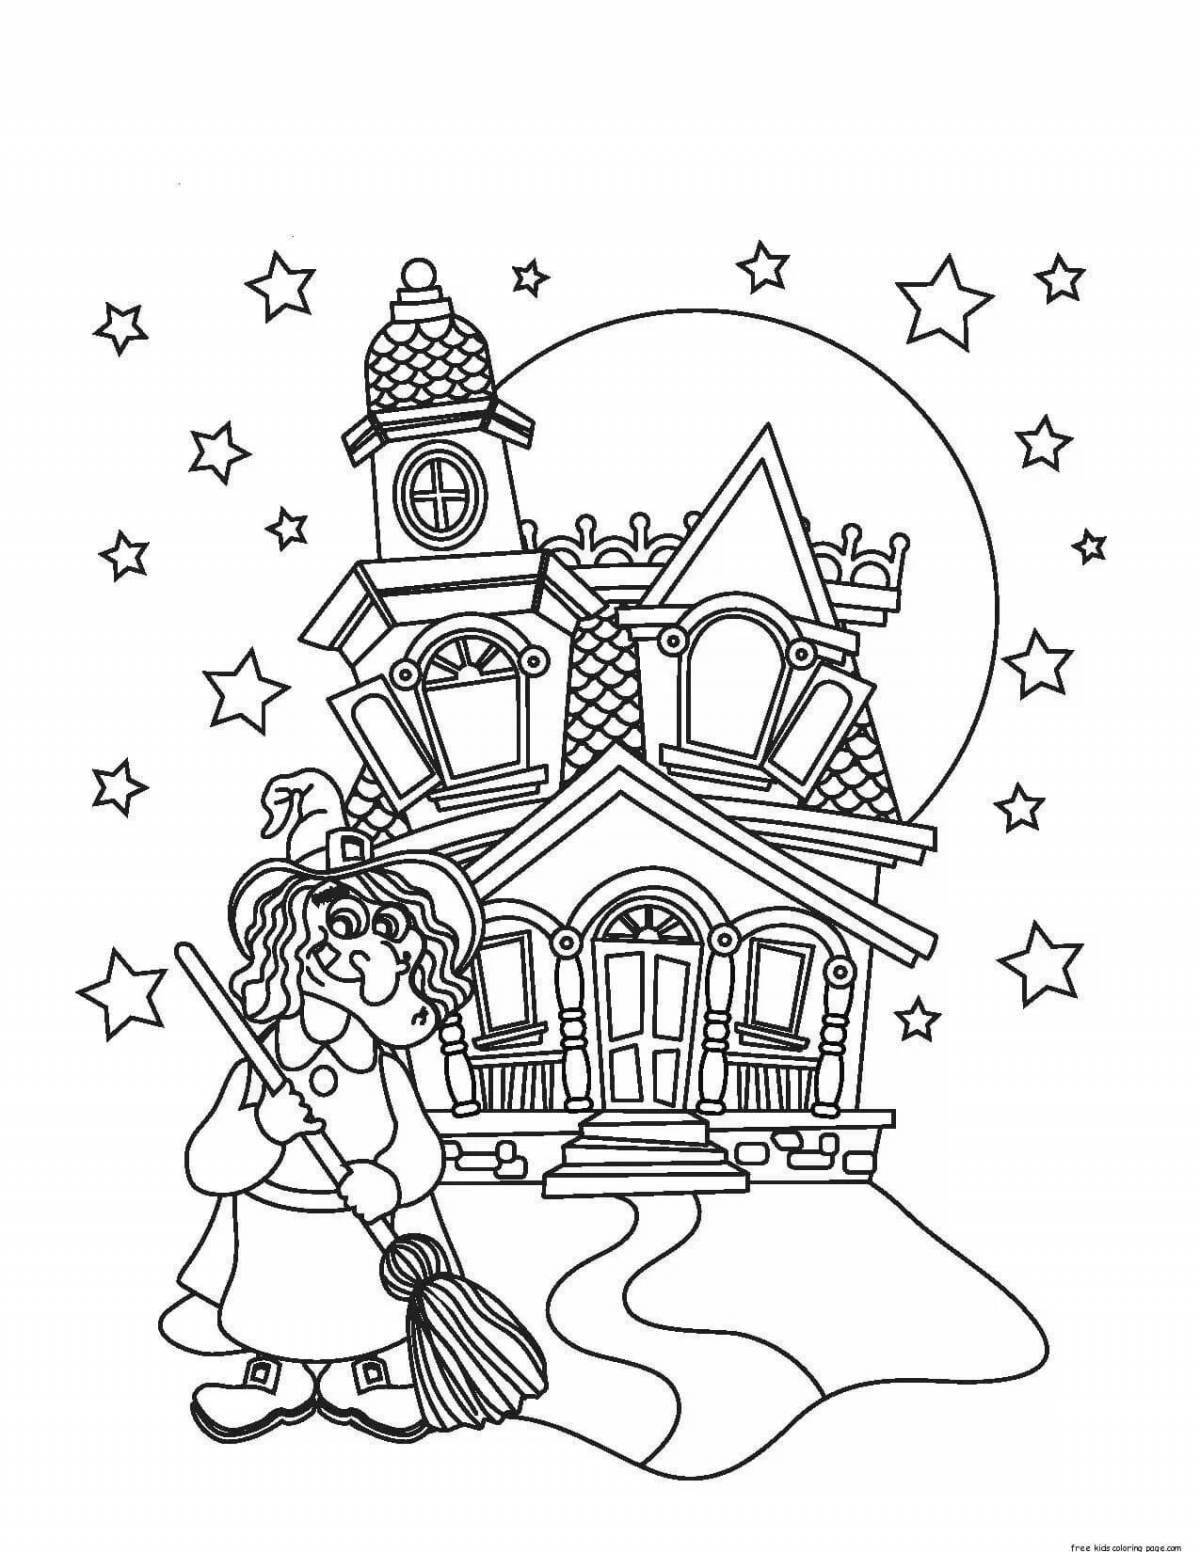 Amazing coloring pages for girls with houses and castles